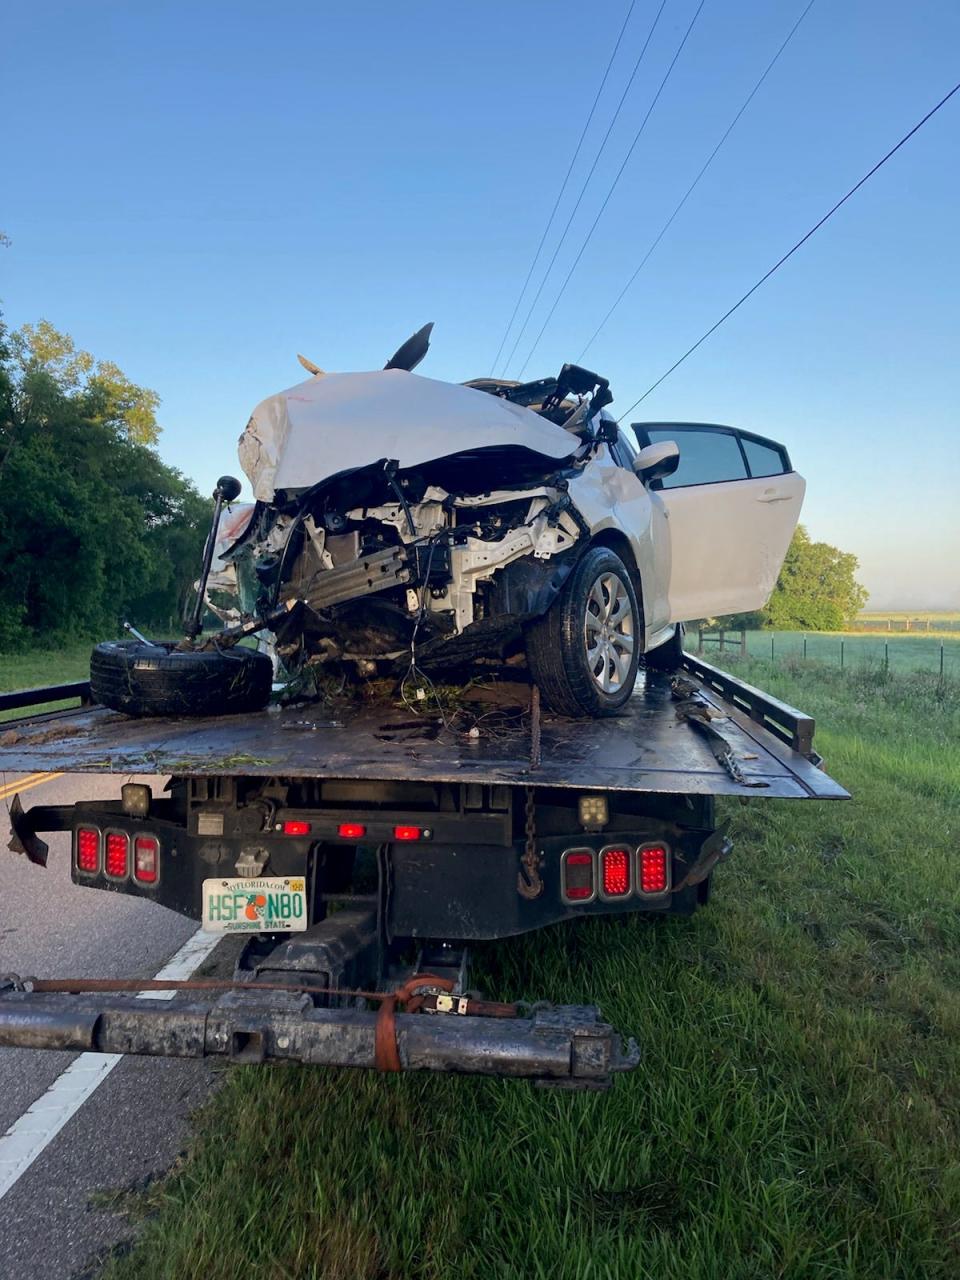 This severely damaged Toyota Corolla was involved in a single-vehicle crash in Dunnellon early Saturday. One occupant was killed and another injured.